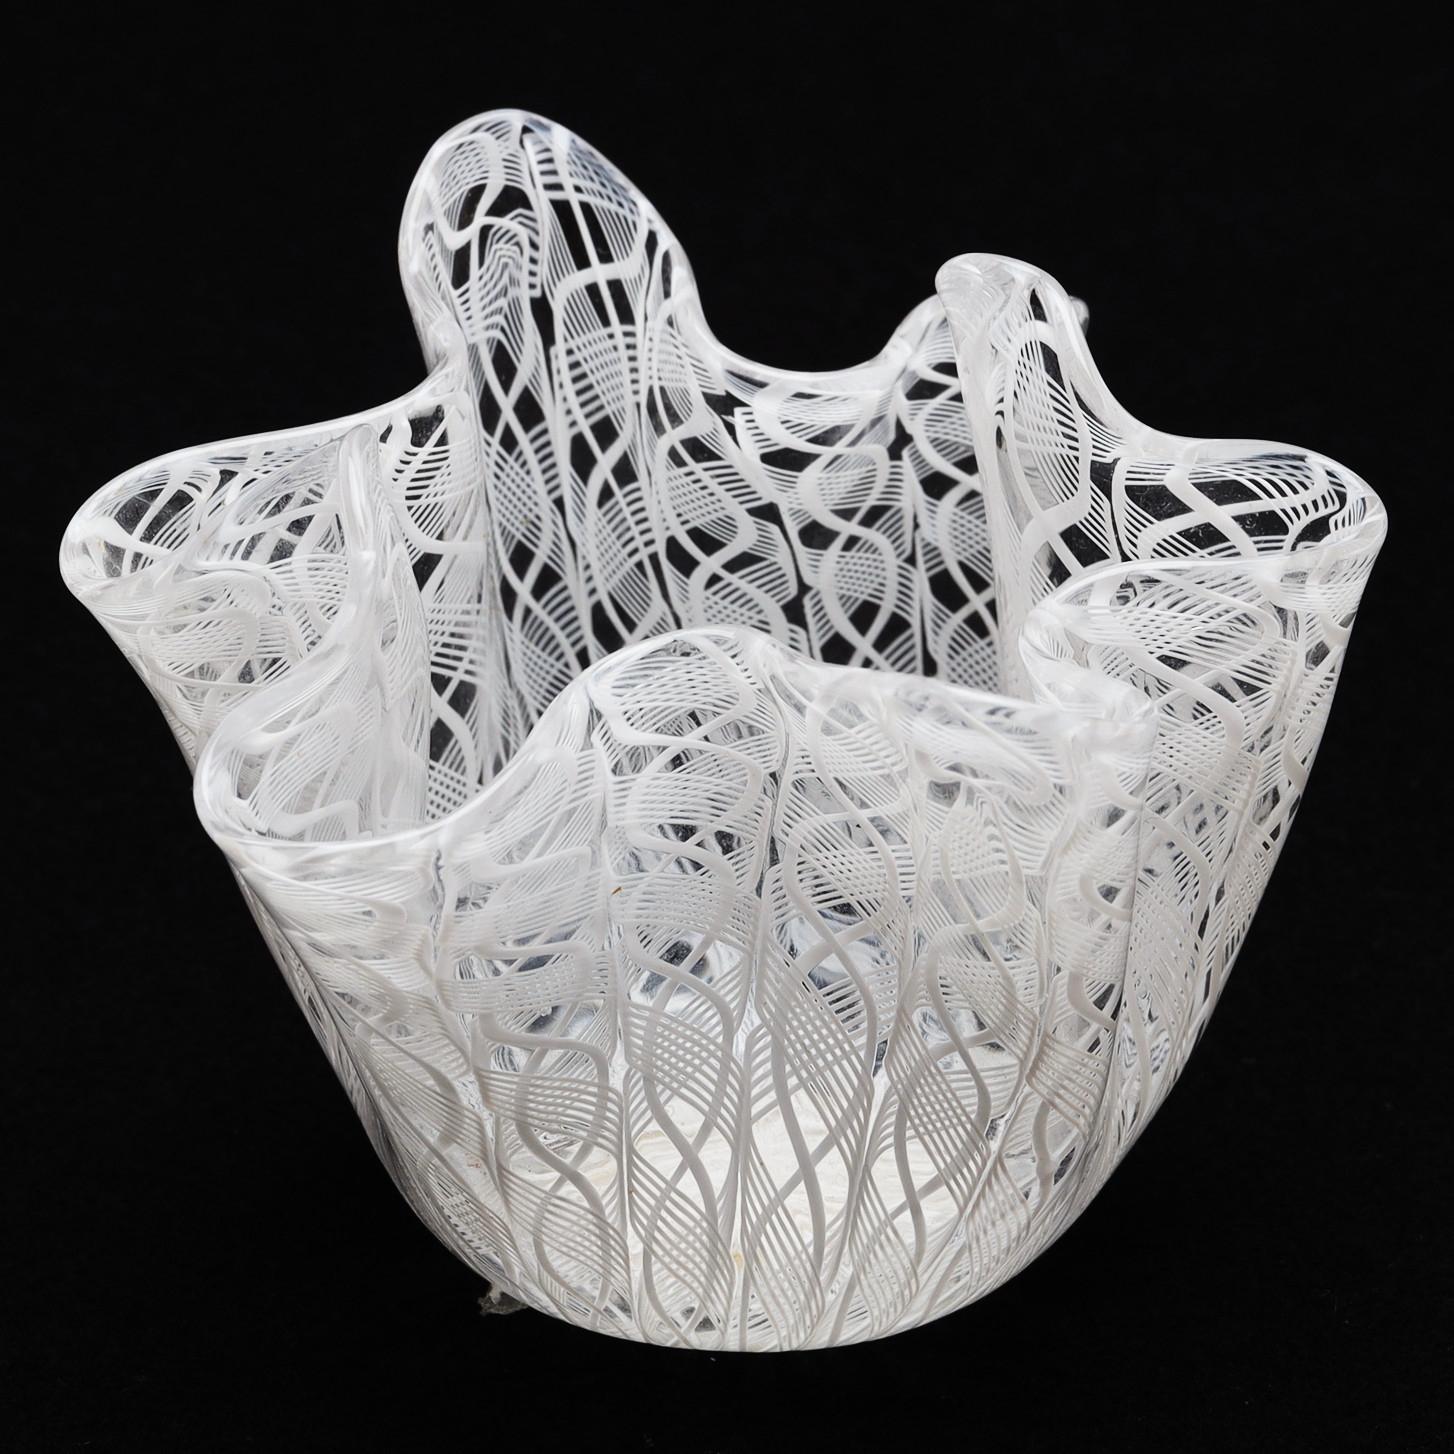 Handkerchief ''zanfirico''  bowl/vase attributed to Fulvio Bianconi for Venini, Murano. This fazzoletto bowl features zanfirico glass with lattimo white netted vertical cane and white ribbons, showcasing a technique dating back to the 16th century